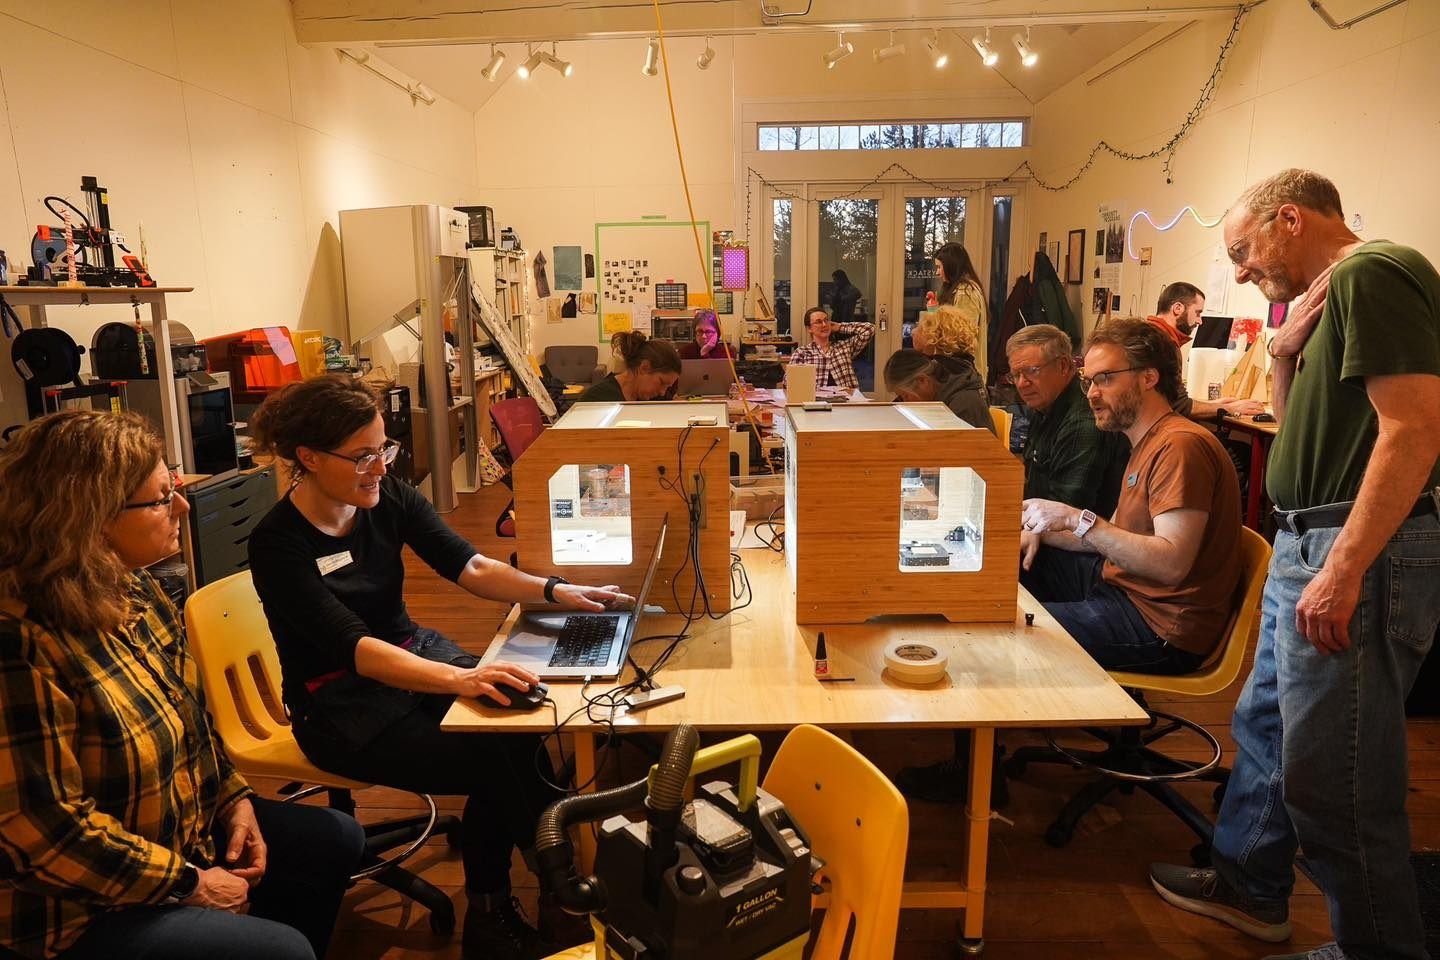 Ever wonder what happens when digital fabrication meets STEAM? See for yourself! Take a look back at the very first year of the Downeast Maine Arts Residency, empowering artists and strengthening our community. 

Not only did visiting artists develop